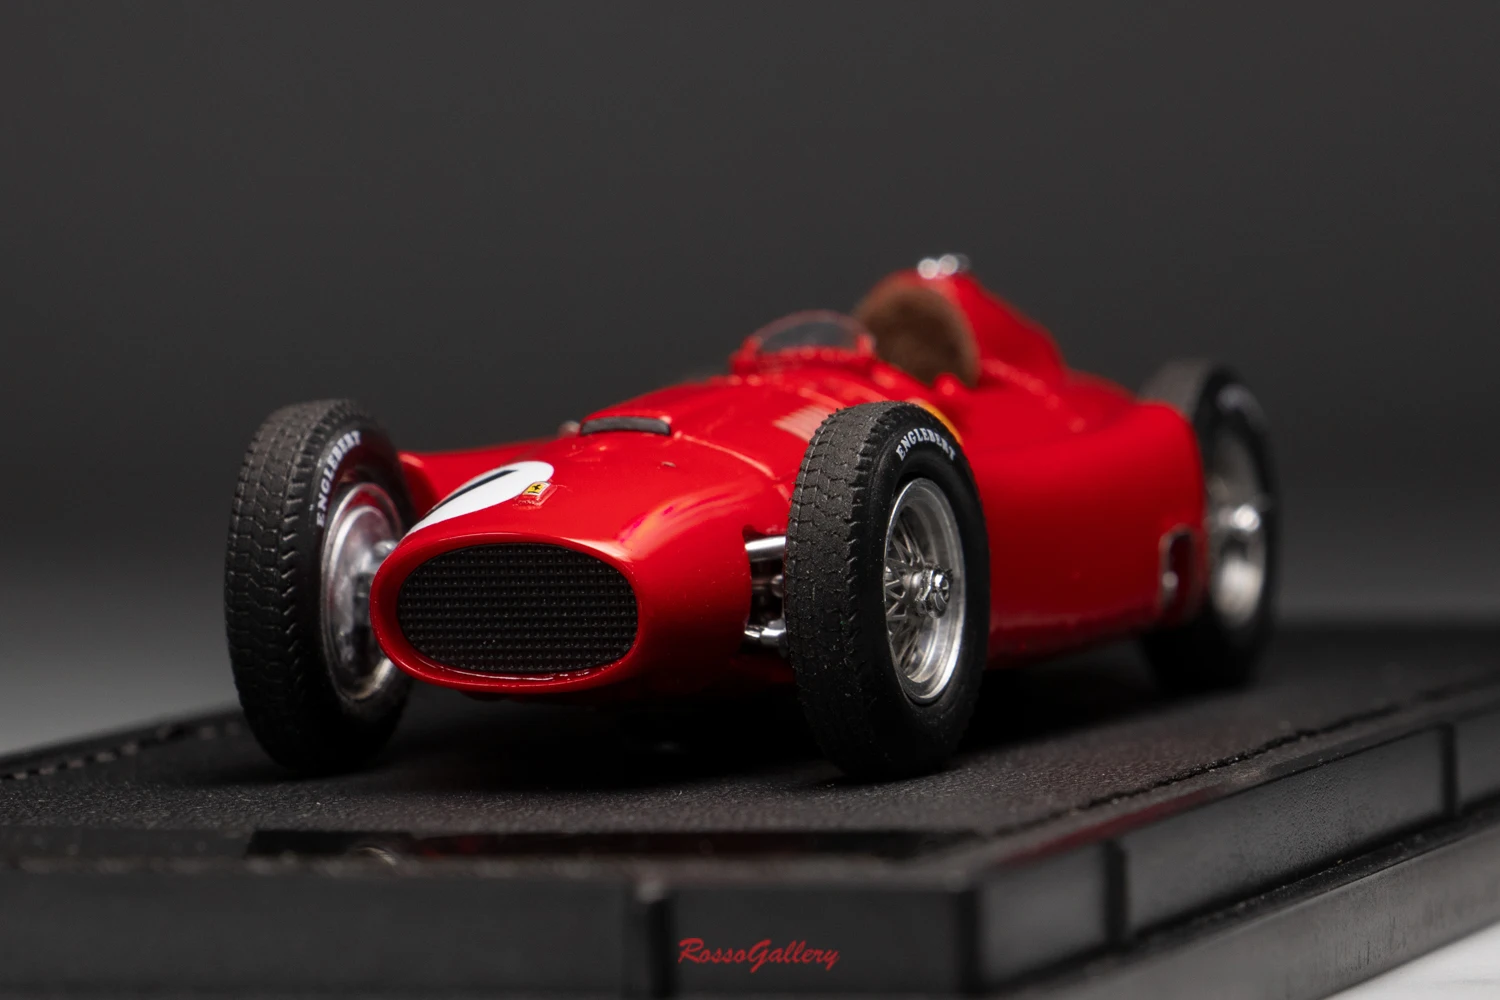 

TM TopMarques 1:43 F1 Ferrari D50 FangioBuyse 1956 RG Simulated Limited Edition Resin Alloy Static Car Model Toy Gift